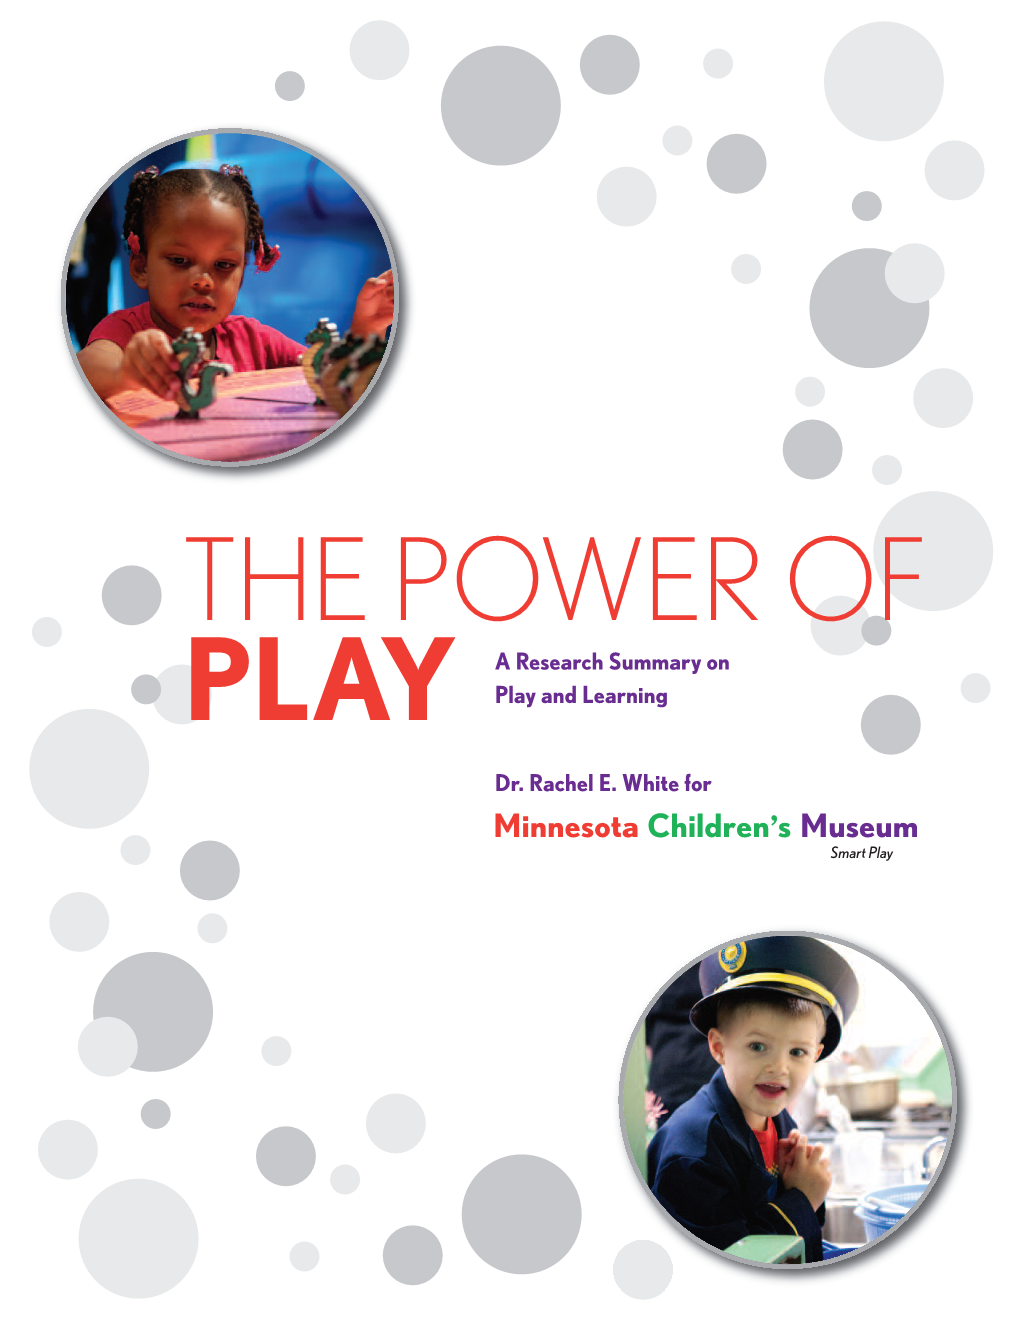 A Research Summary on Play and Learning